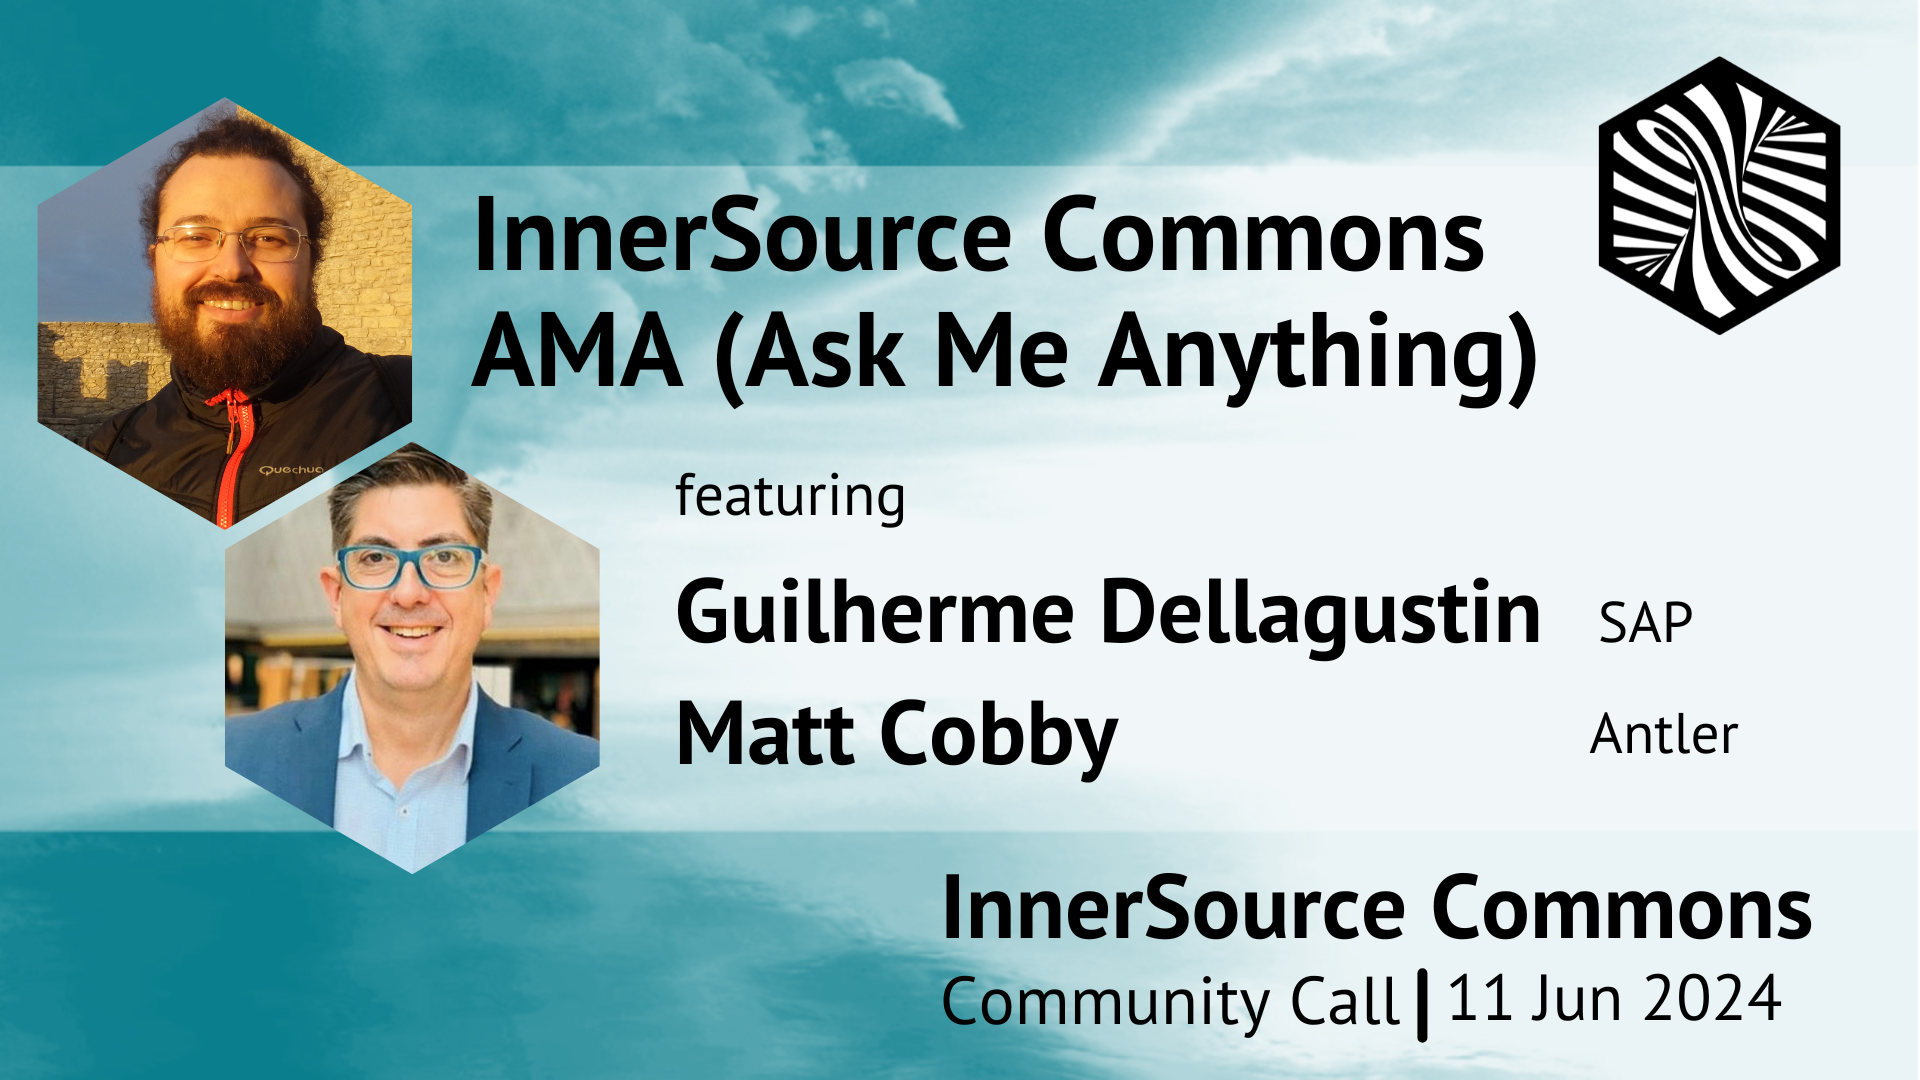 InnerSource Commons AMA (Ask Me Anything)